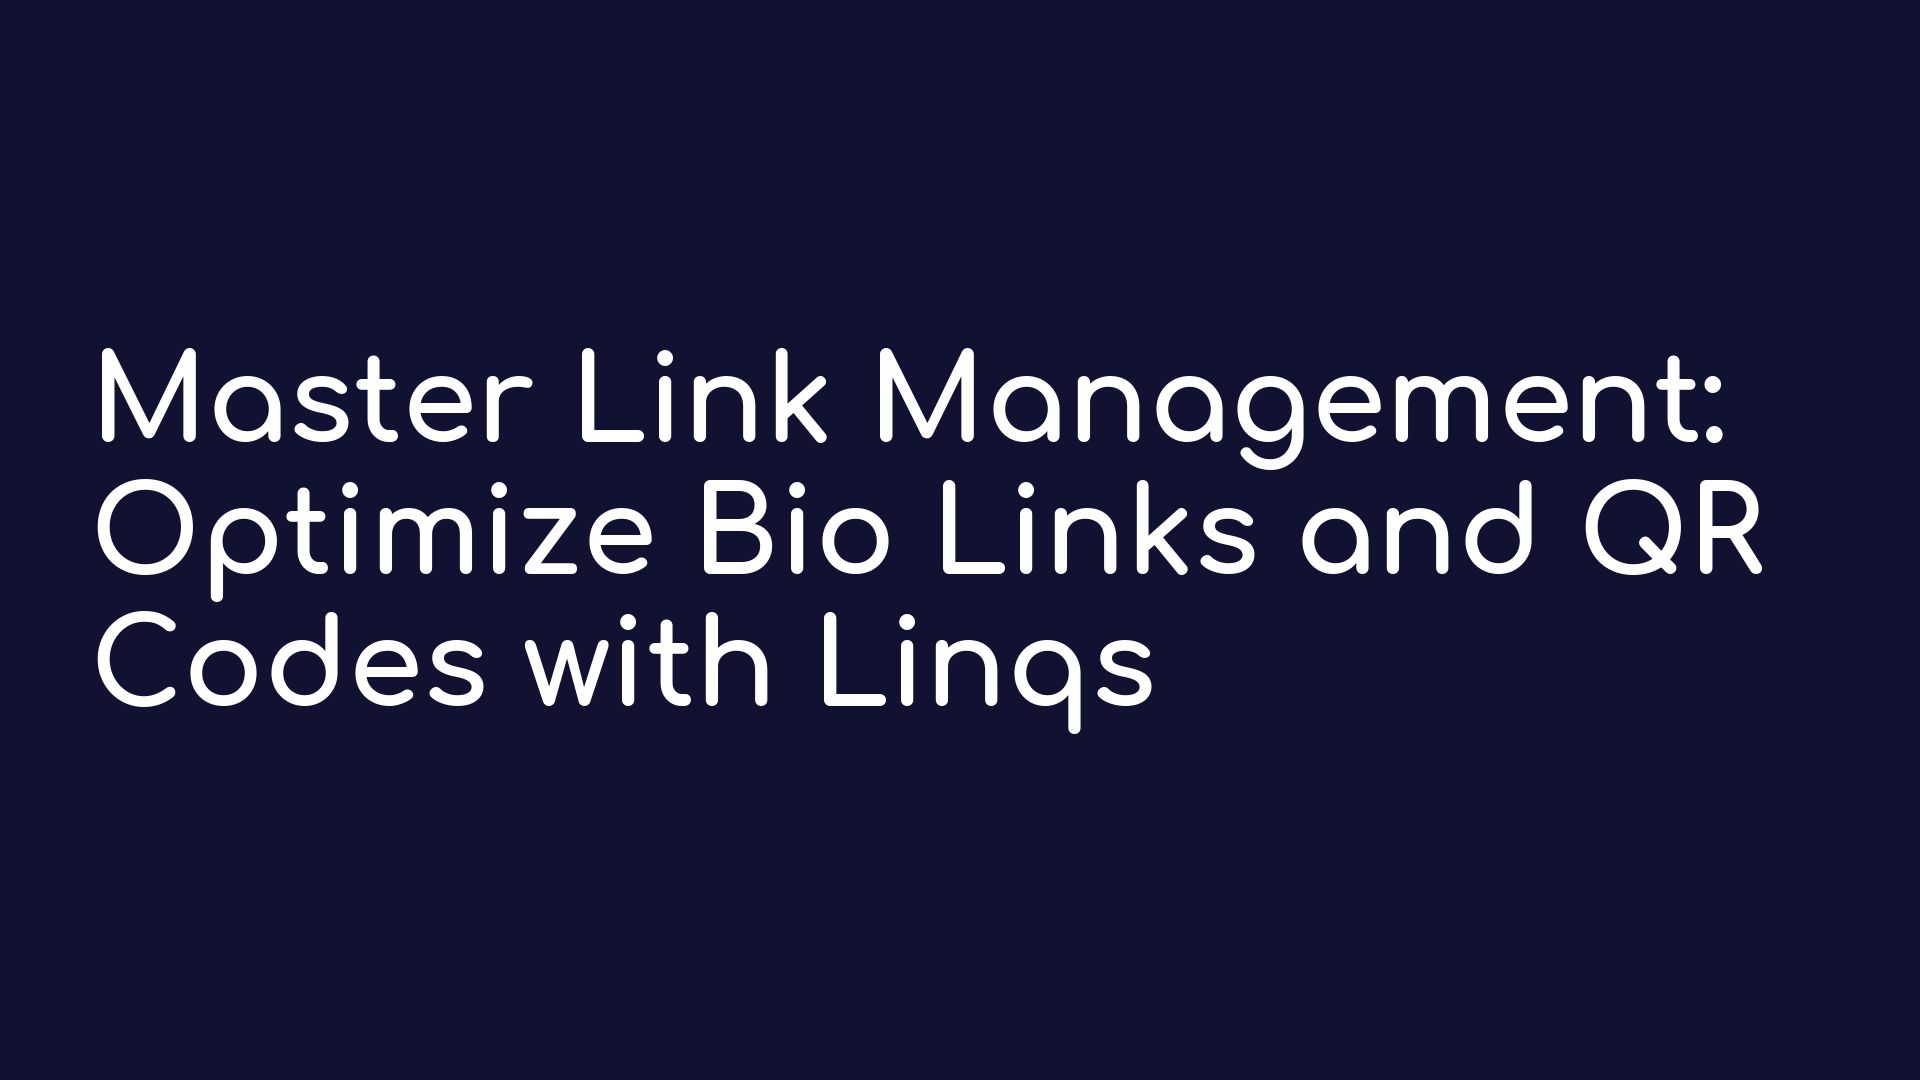 Master Link Management: Optimize Bio Links and QR Codes with Linqs